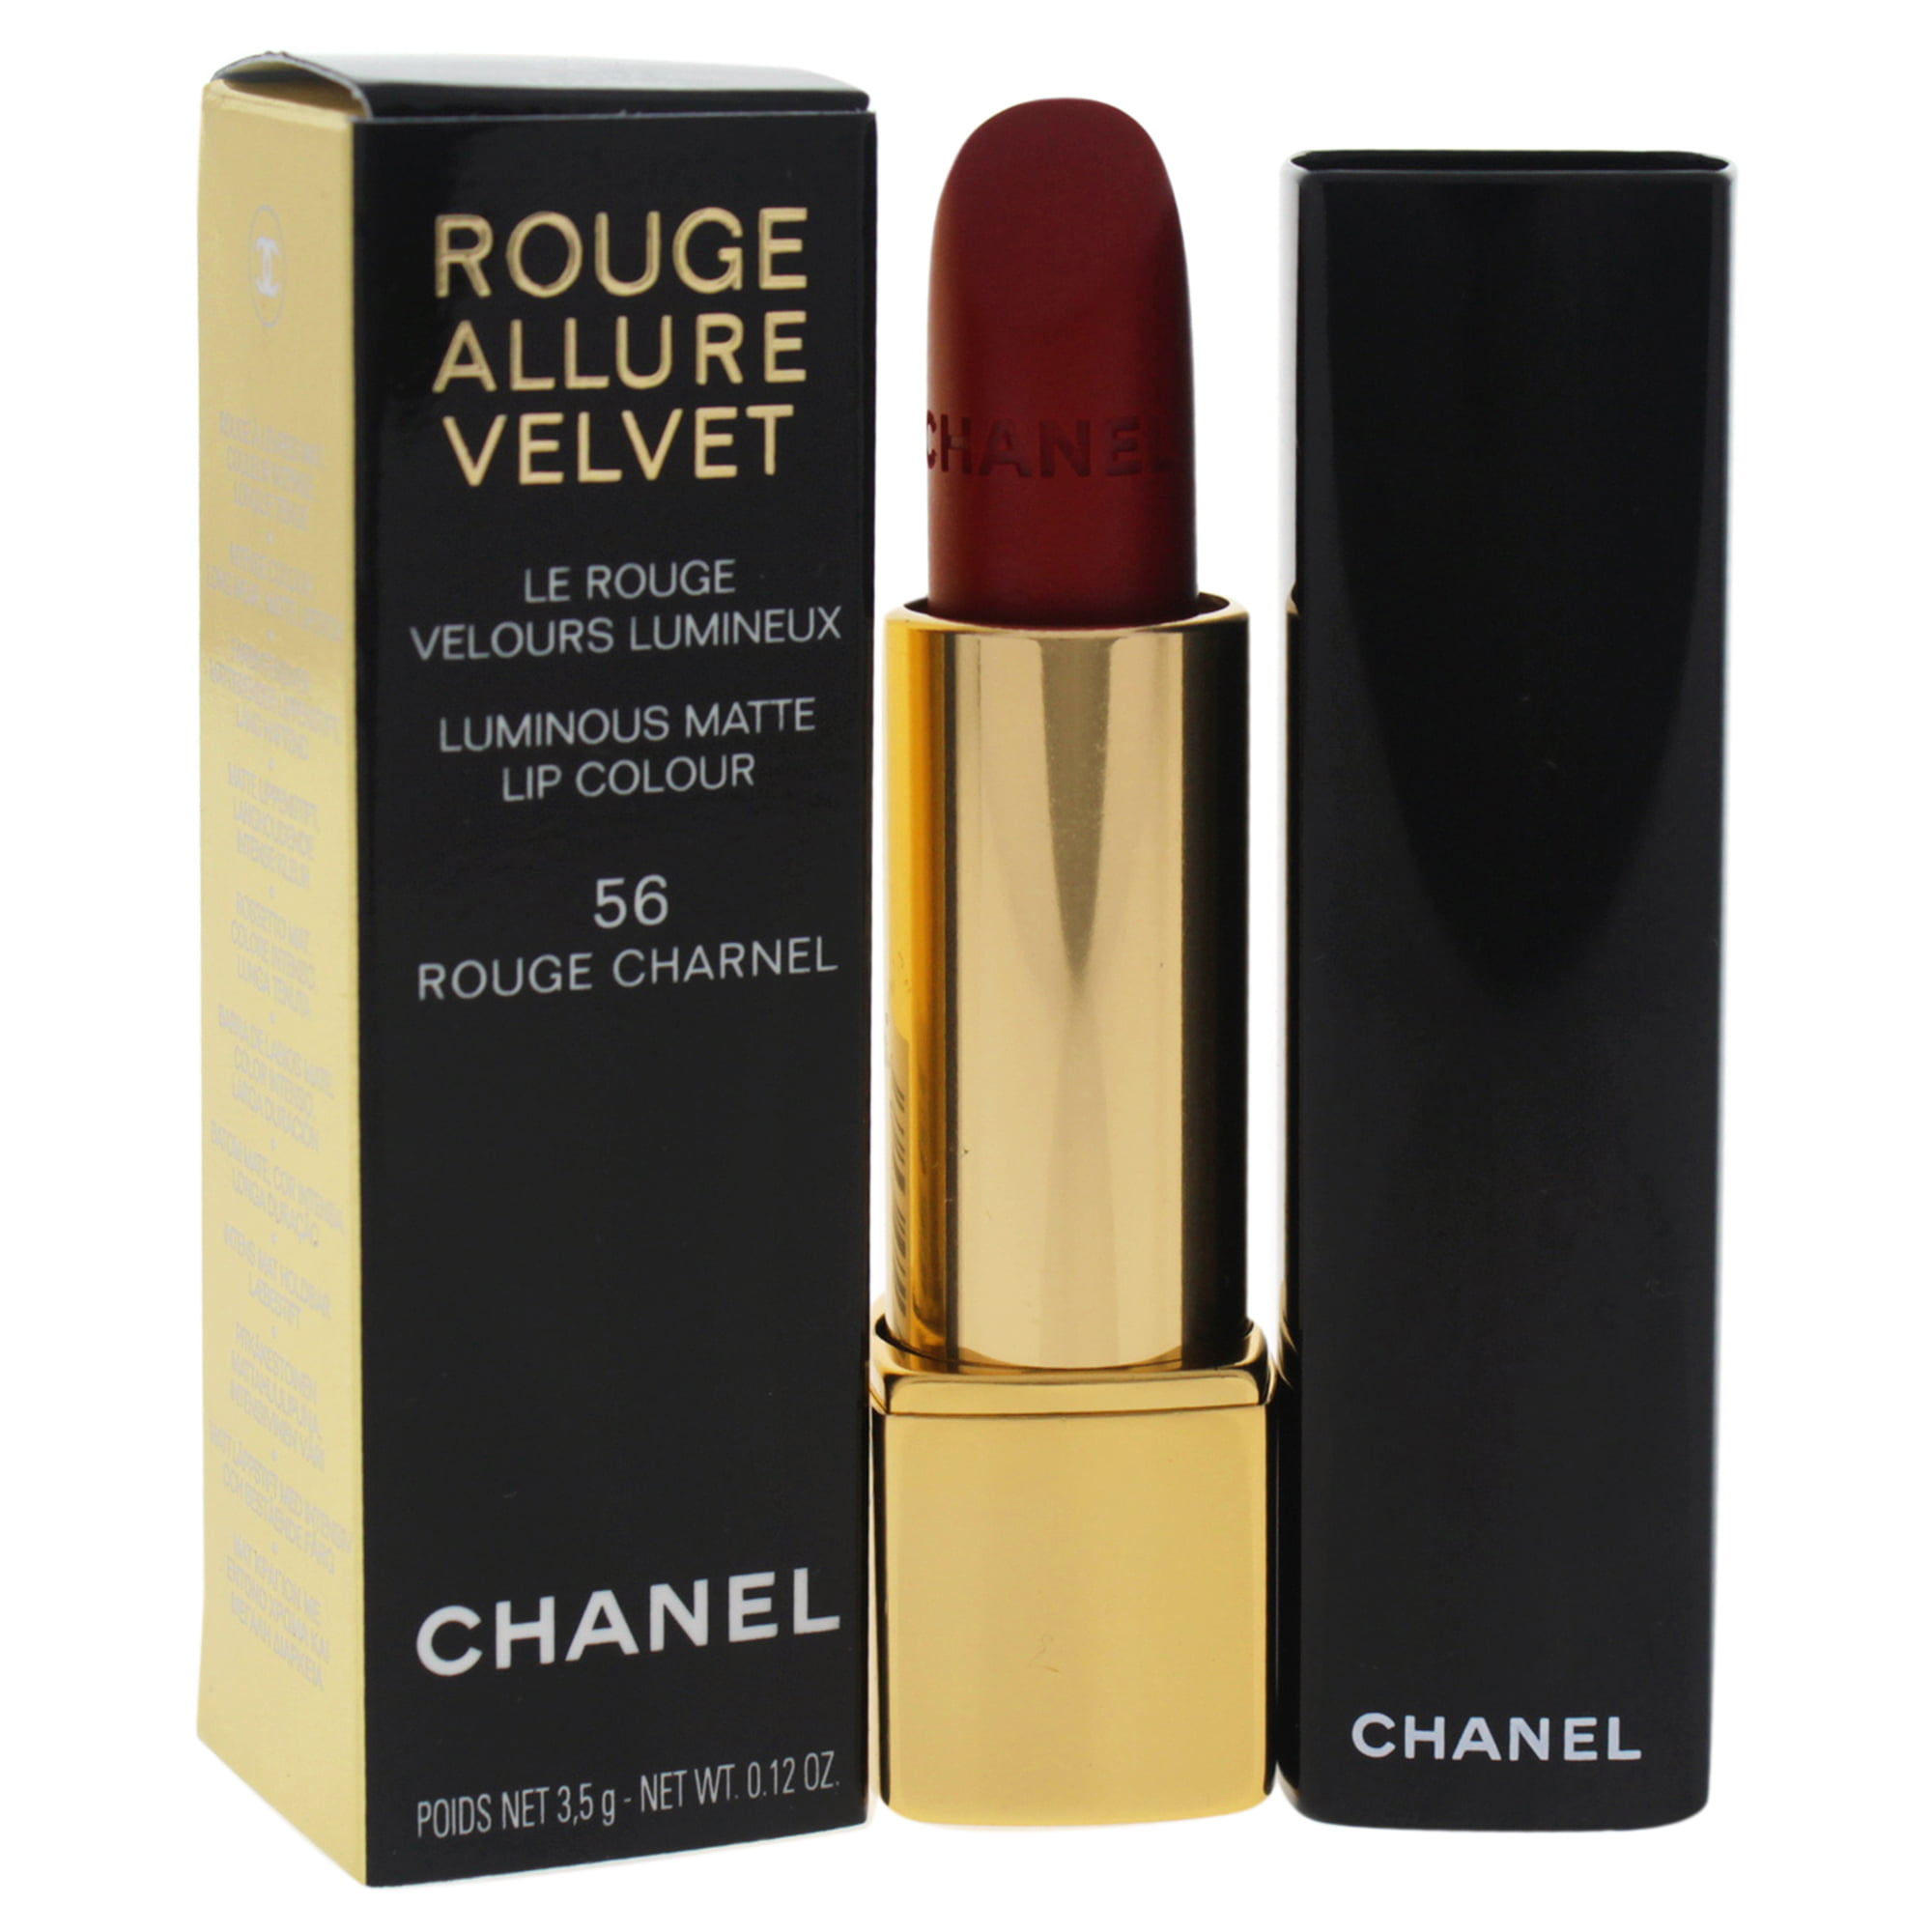 Chanel Lipstick Rouge Allure Rouge Ingenue Velvet Charnel and Audace   YouTube